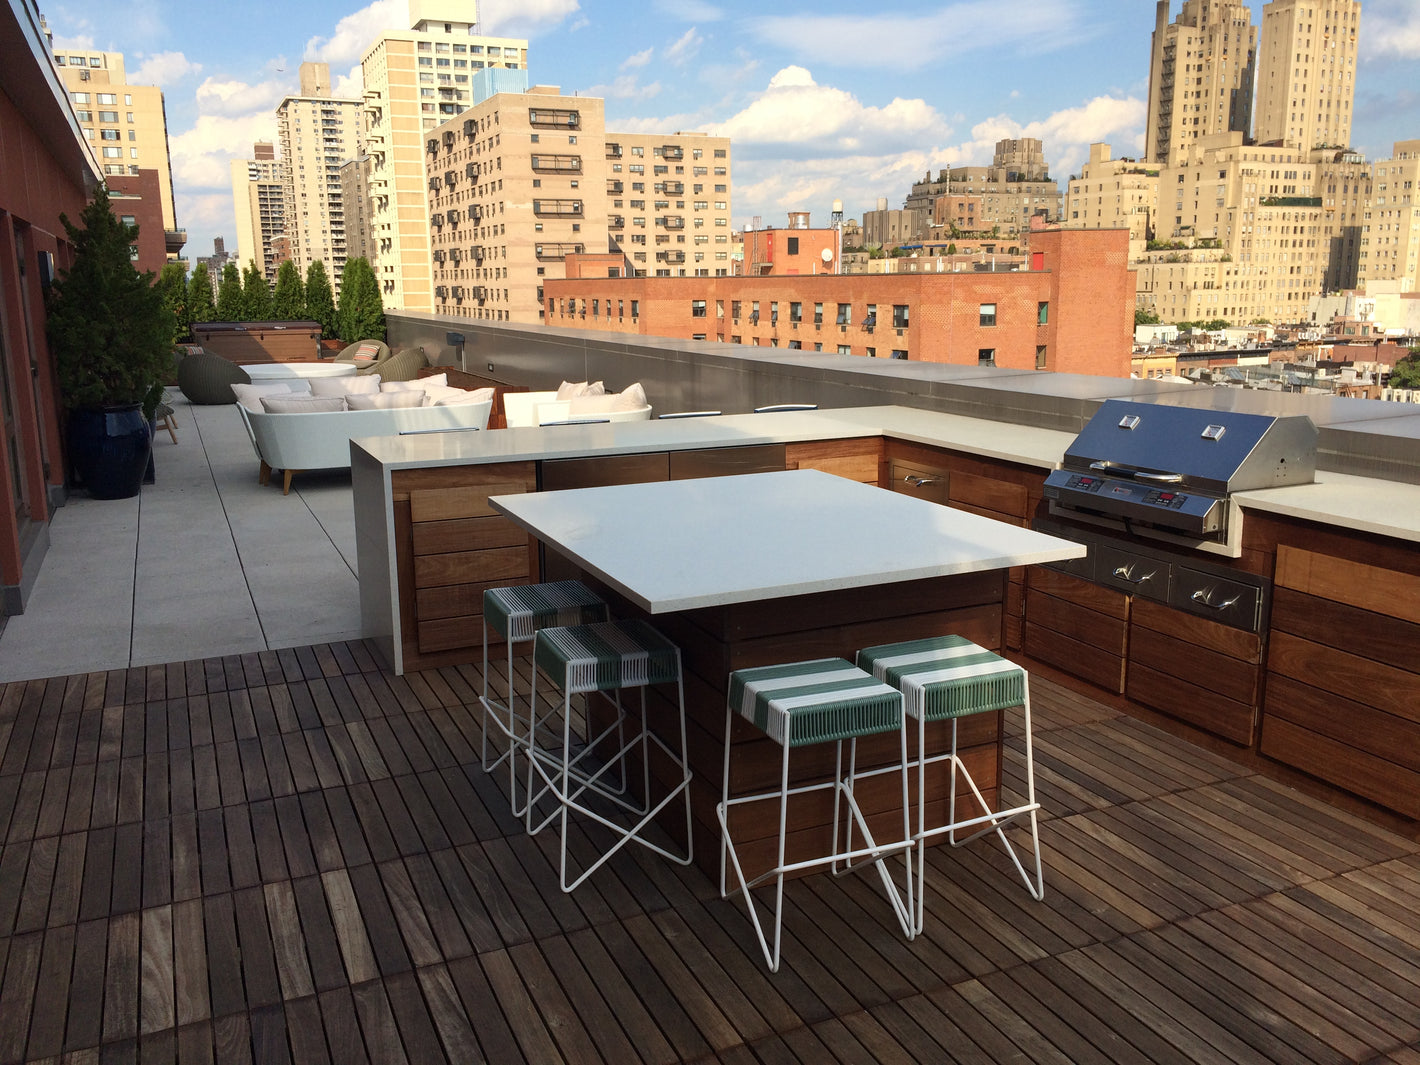 Custom rooftop kitchen with middle island and white granite countertop created by TCSC